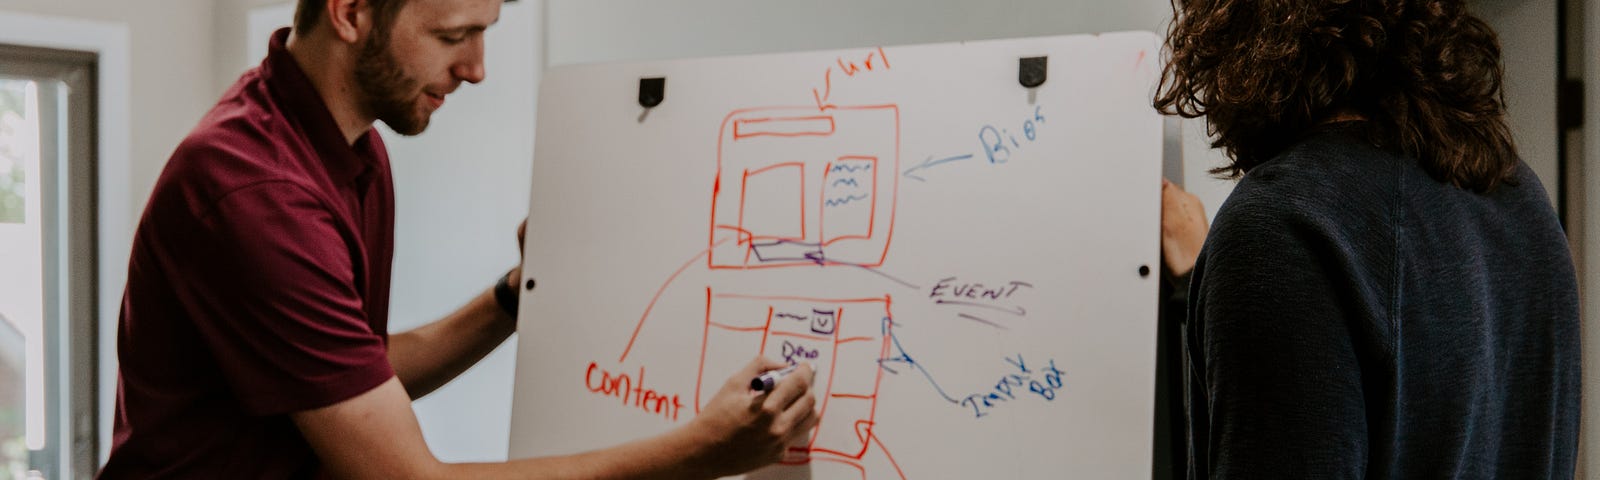 Two people stood at a whiteboard and drawing a wireframe of a webpage